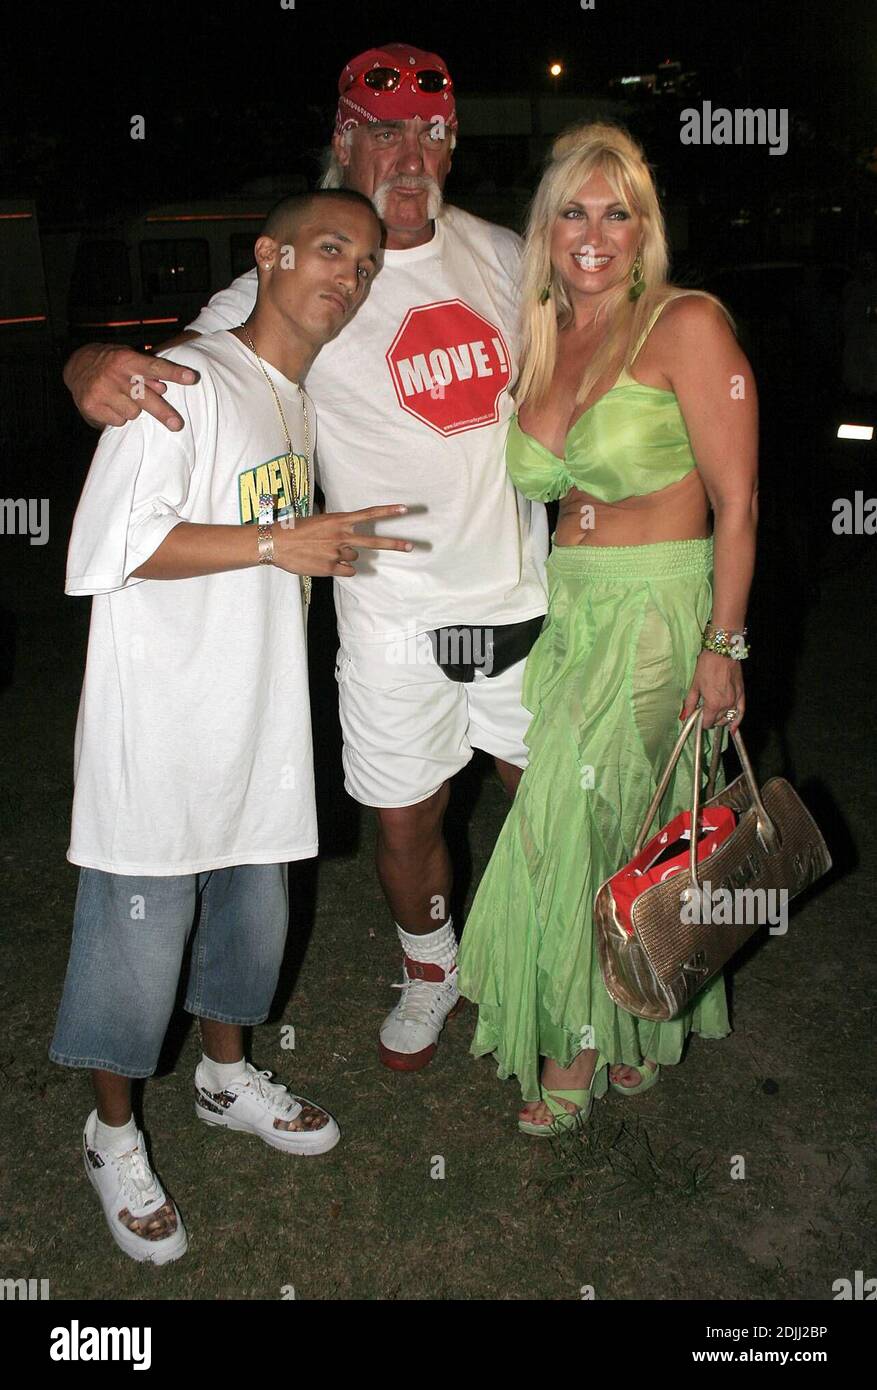 Brooke Hogan performing at Memorial Fest 06. Joining her on stage, rapper  and grill designer Paul Wall, who co-starred in Brooke's new video "About  Us," shot in anticipation of her album debut